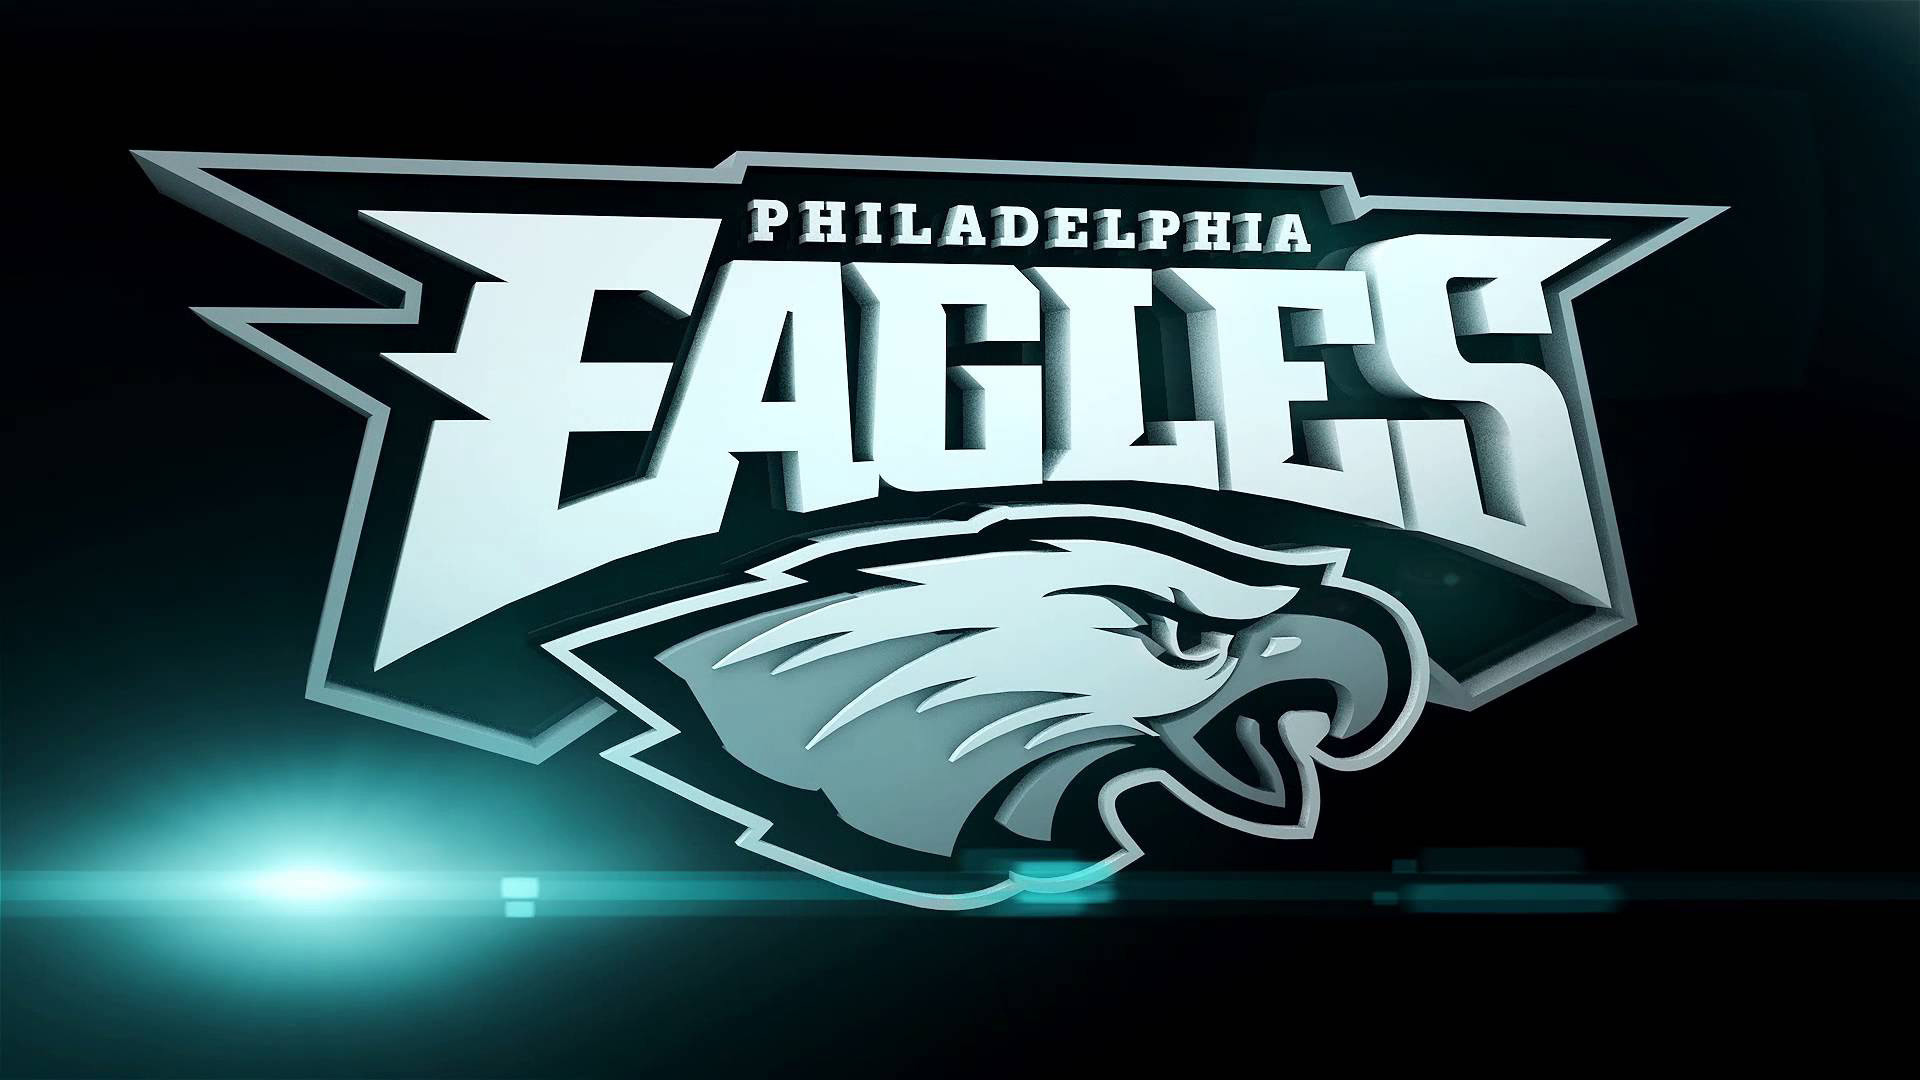 1920x1080 px Widescreen Wallpapers: philadelphia eagles image by Goode Black for -  TrunkWeed